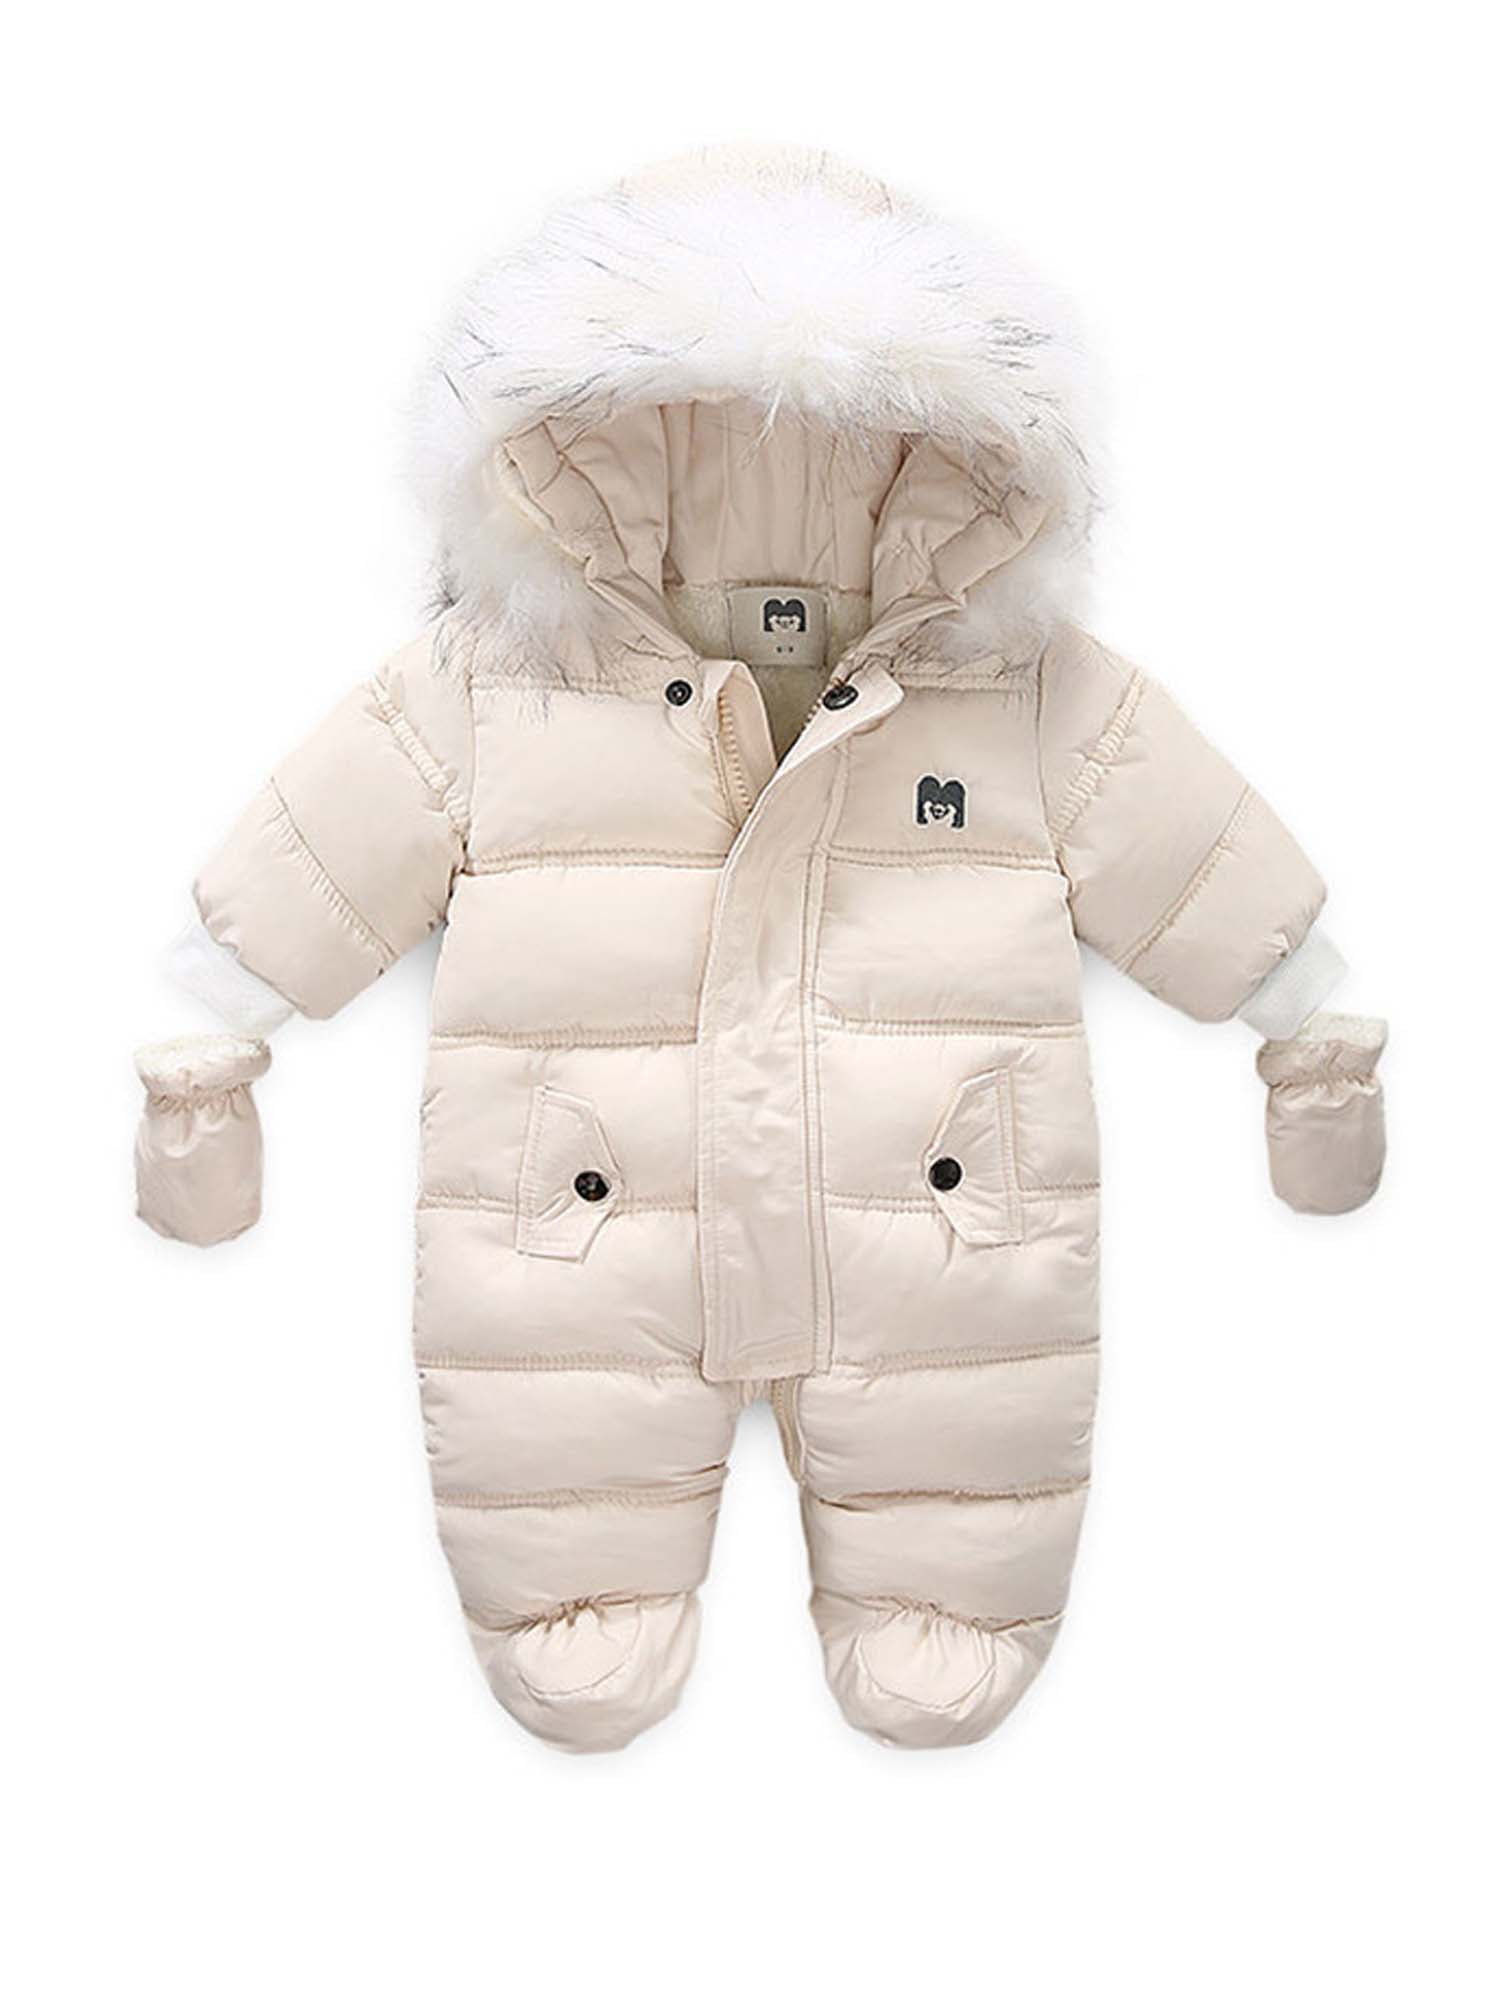 Simplee kids Baby Infant Boy Girl Winter Warm Snowsuit Outwear Newborn Hooded Footed Romper Jumpsuit for 0-18 Months